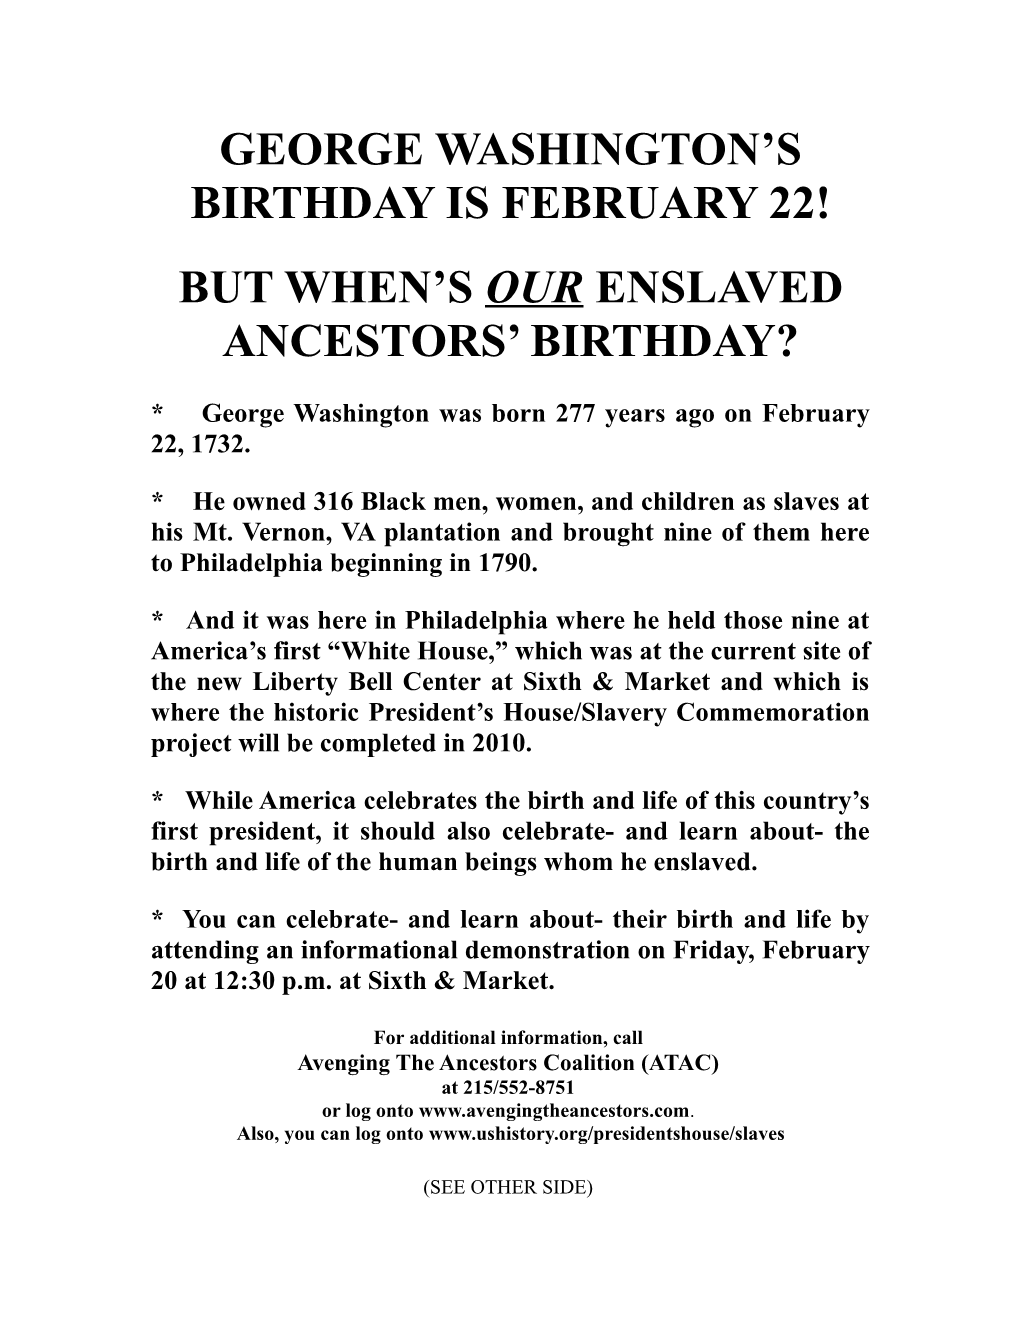 But When S Our Enslaved Ancestors Birthday?